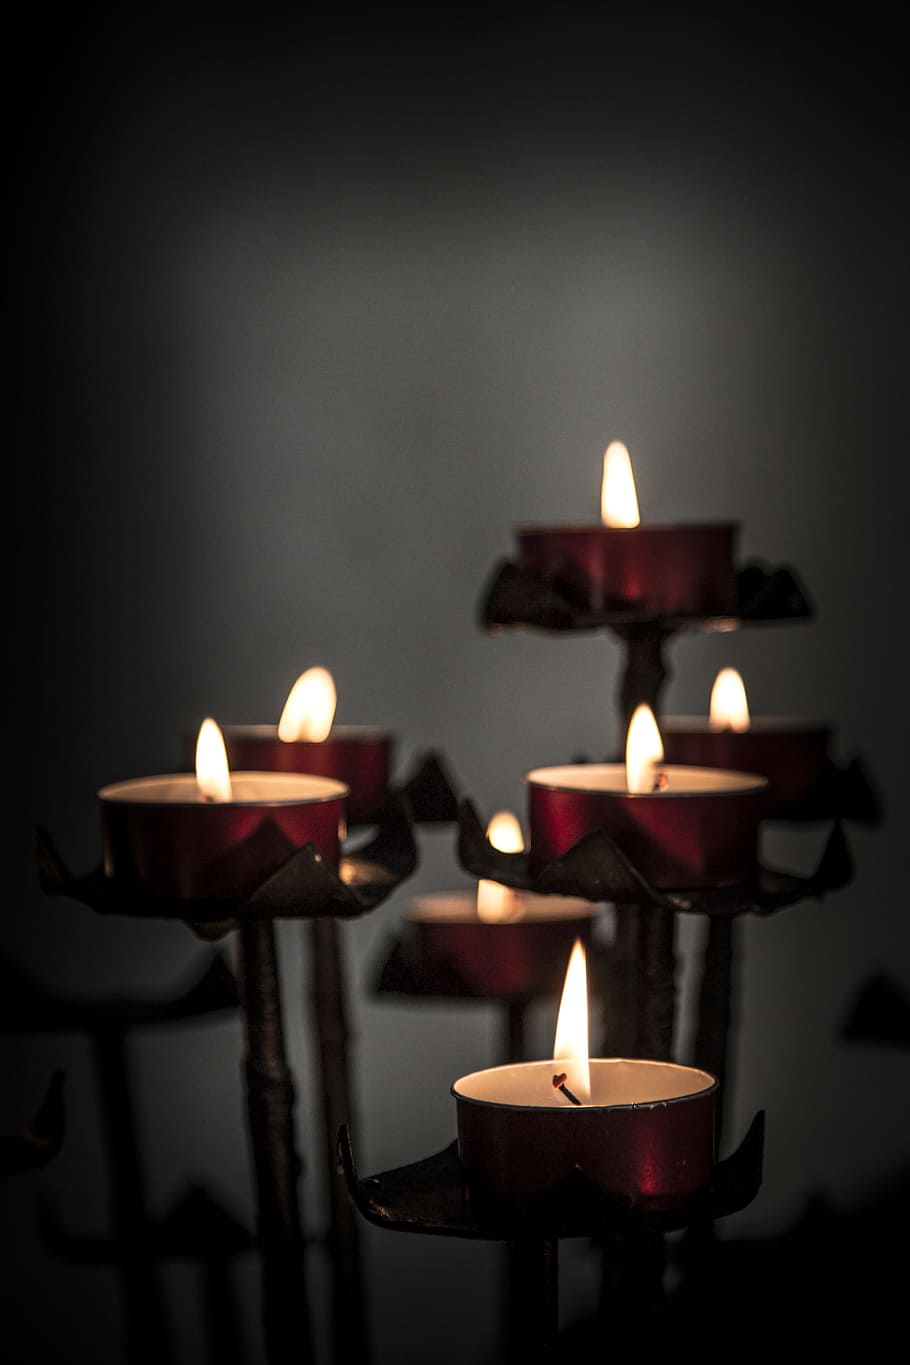 lit tealights, church, candles, votive, religion, religious, light, symbol, flame, candlelight